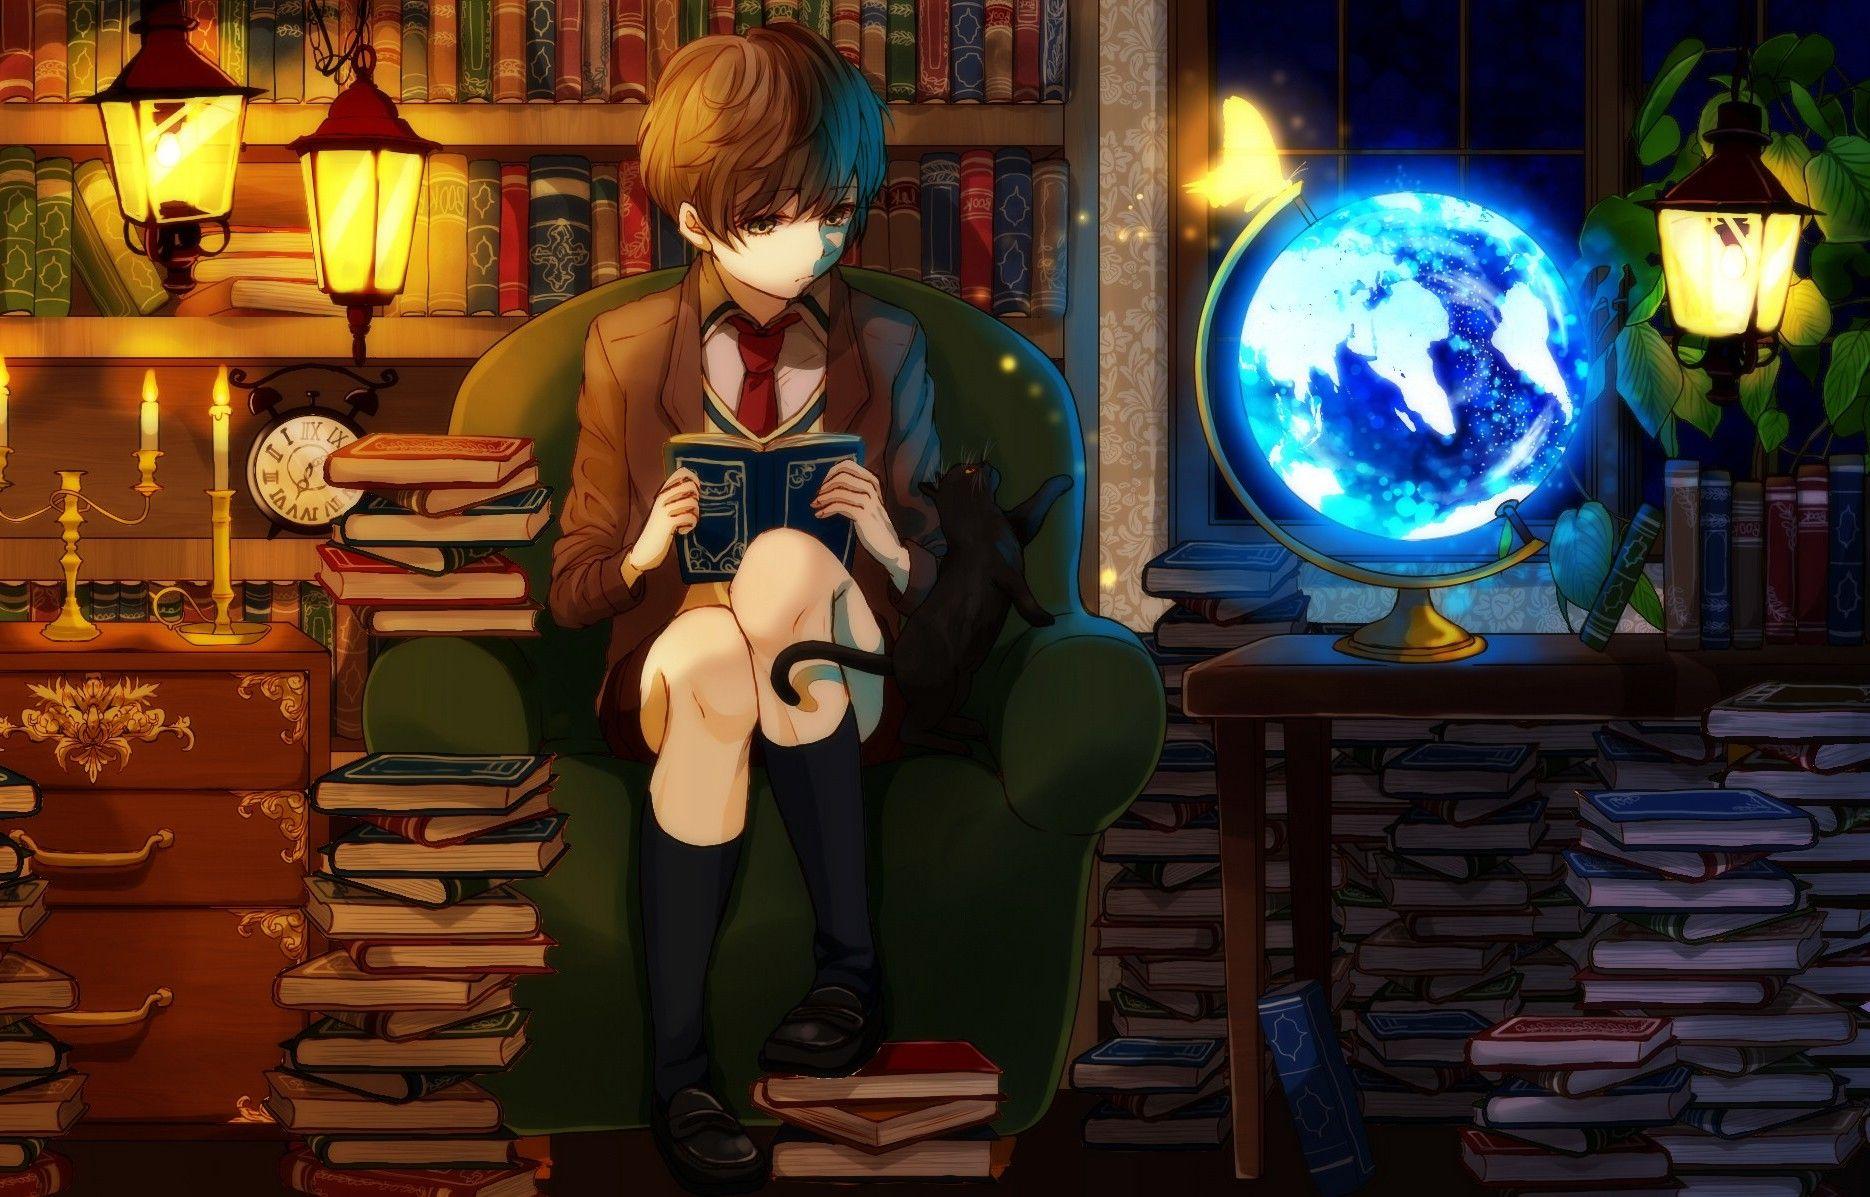 A library by Badriel on DeviantArt